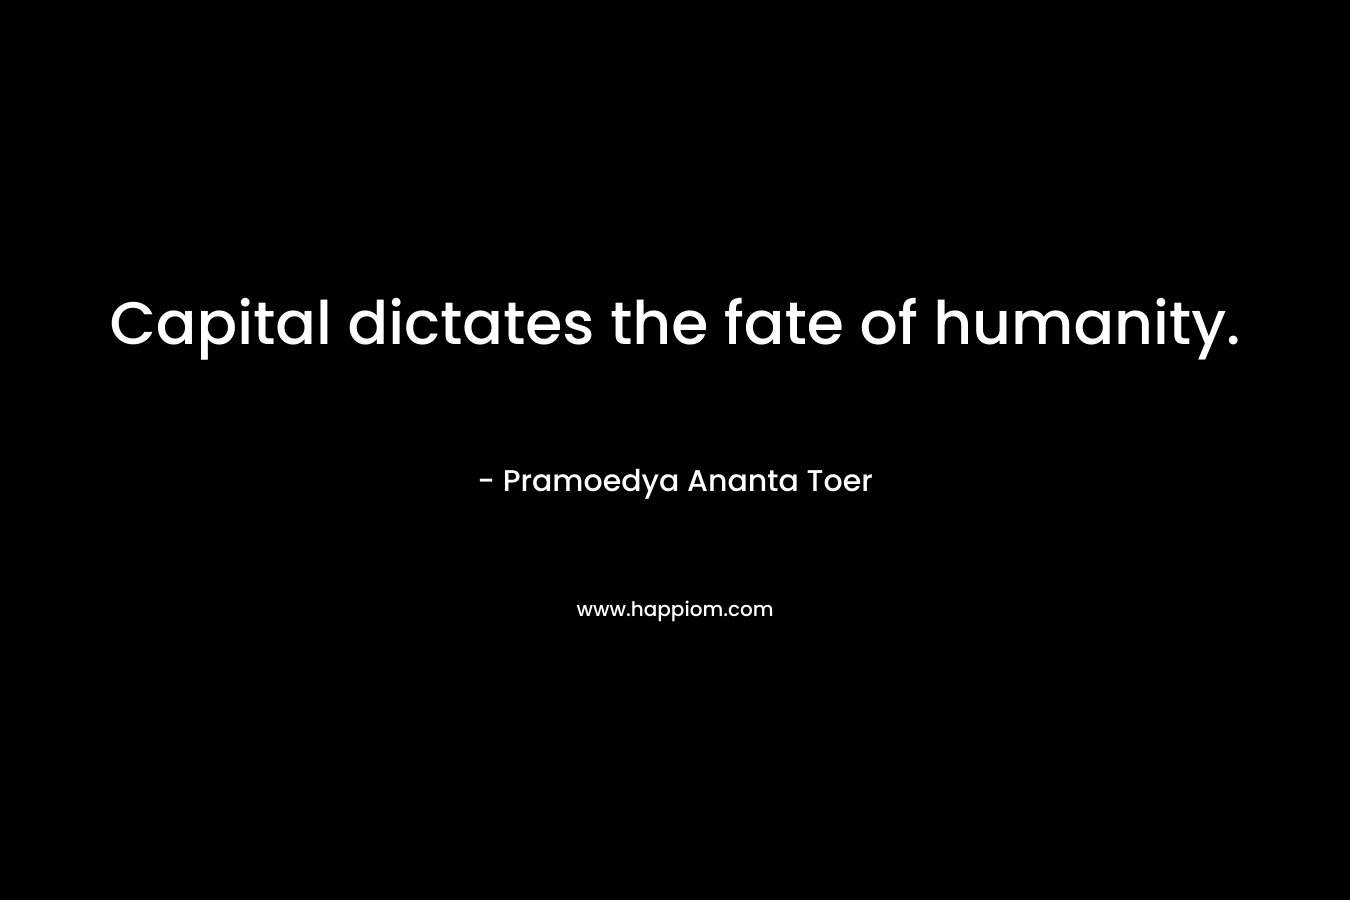 Capital dictates the fate of humanity.